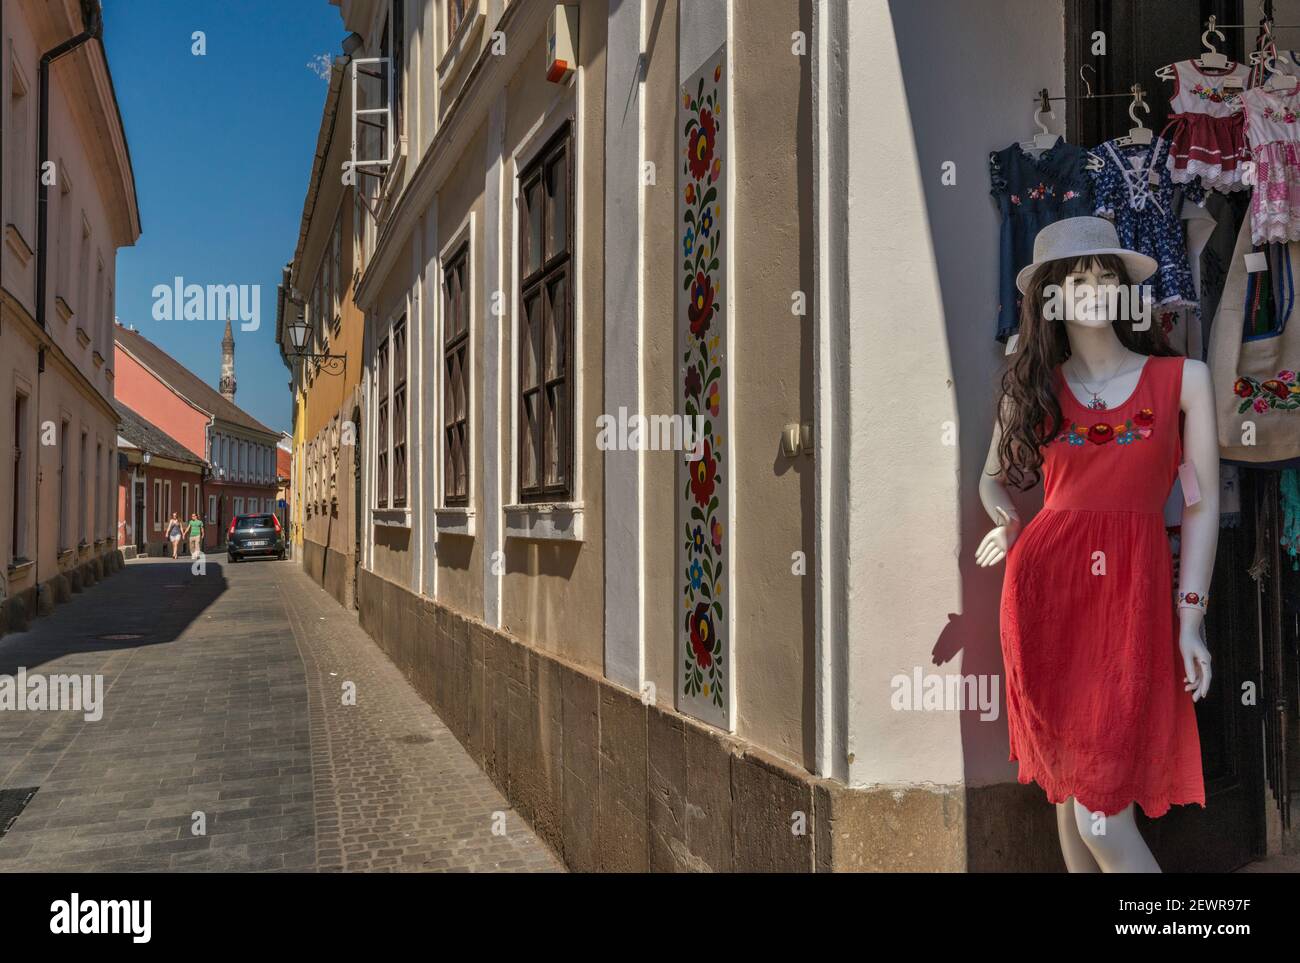 Dobo Istvan utca, alley in Old Town section of Eger, Northern Uplands,  Hungary, Central Europe Stock Photo - Alamy